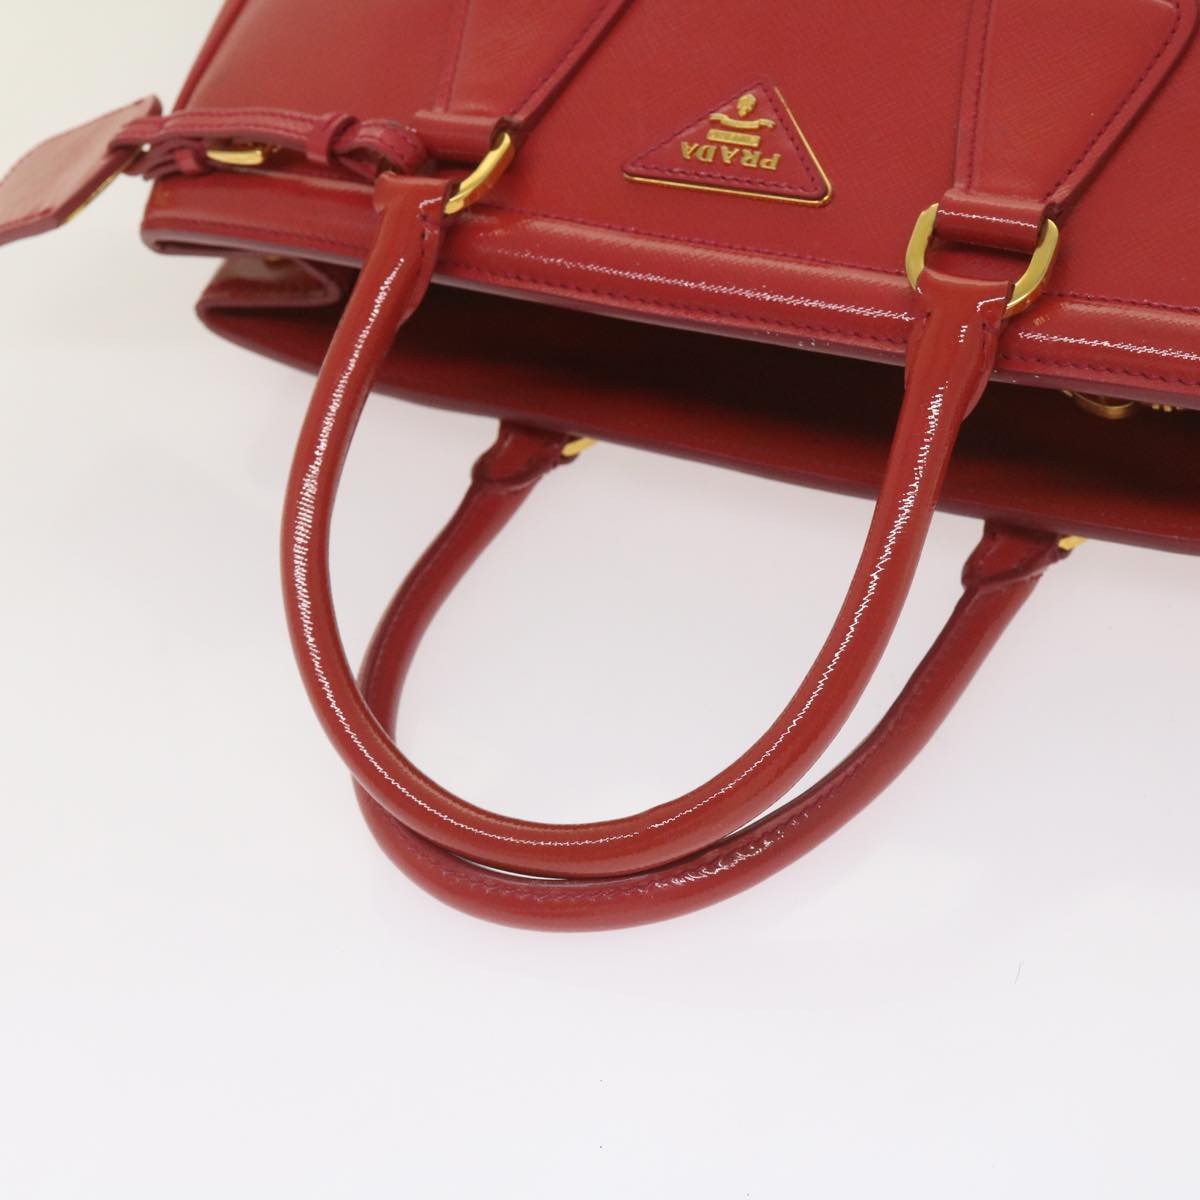 PRADA Hand Bag Leather Red Auth bs12371